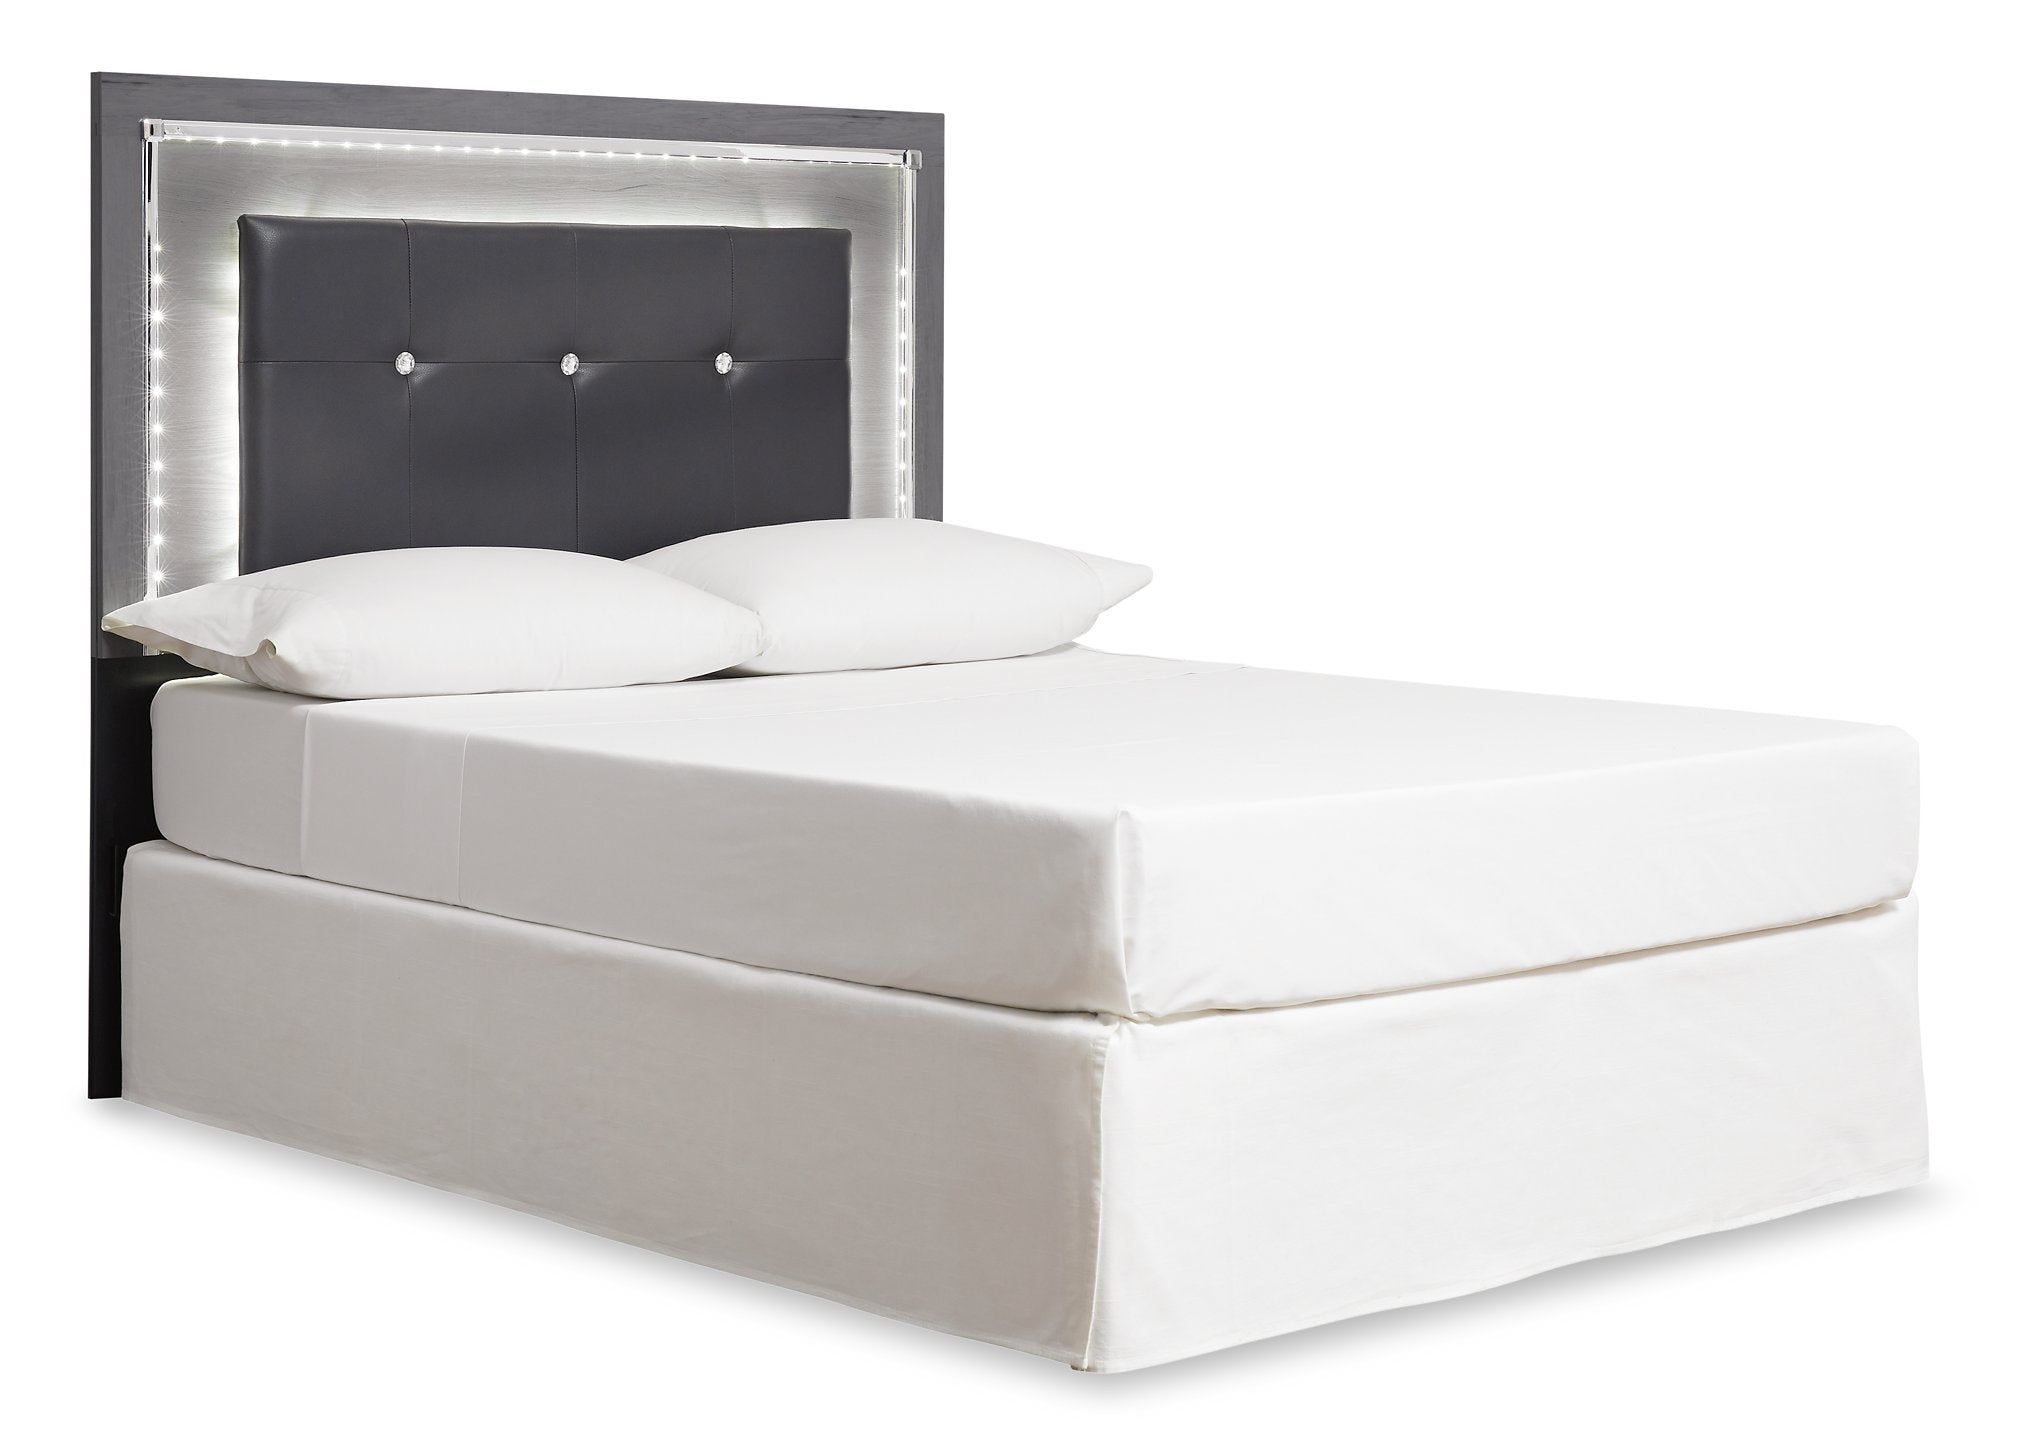 Maximize Your Space: The Benefits of a Bedroom Set with Drawers Under the Bed